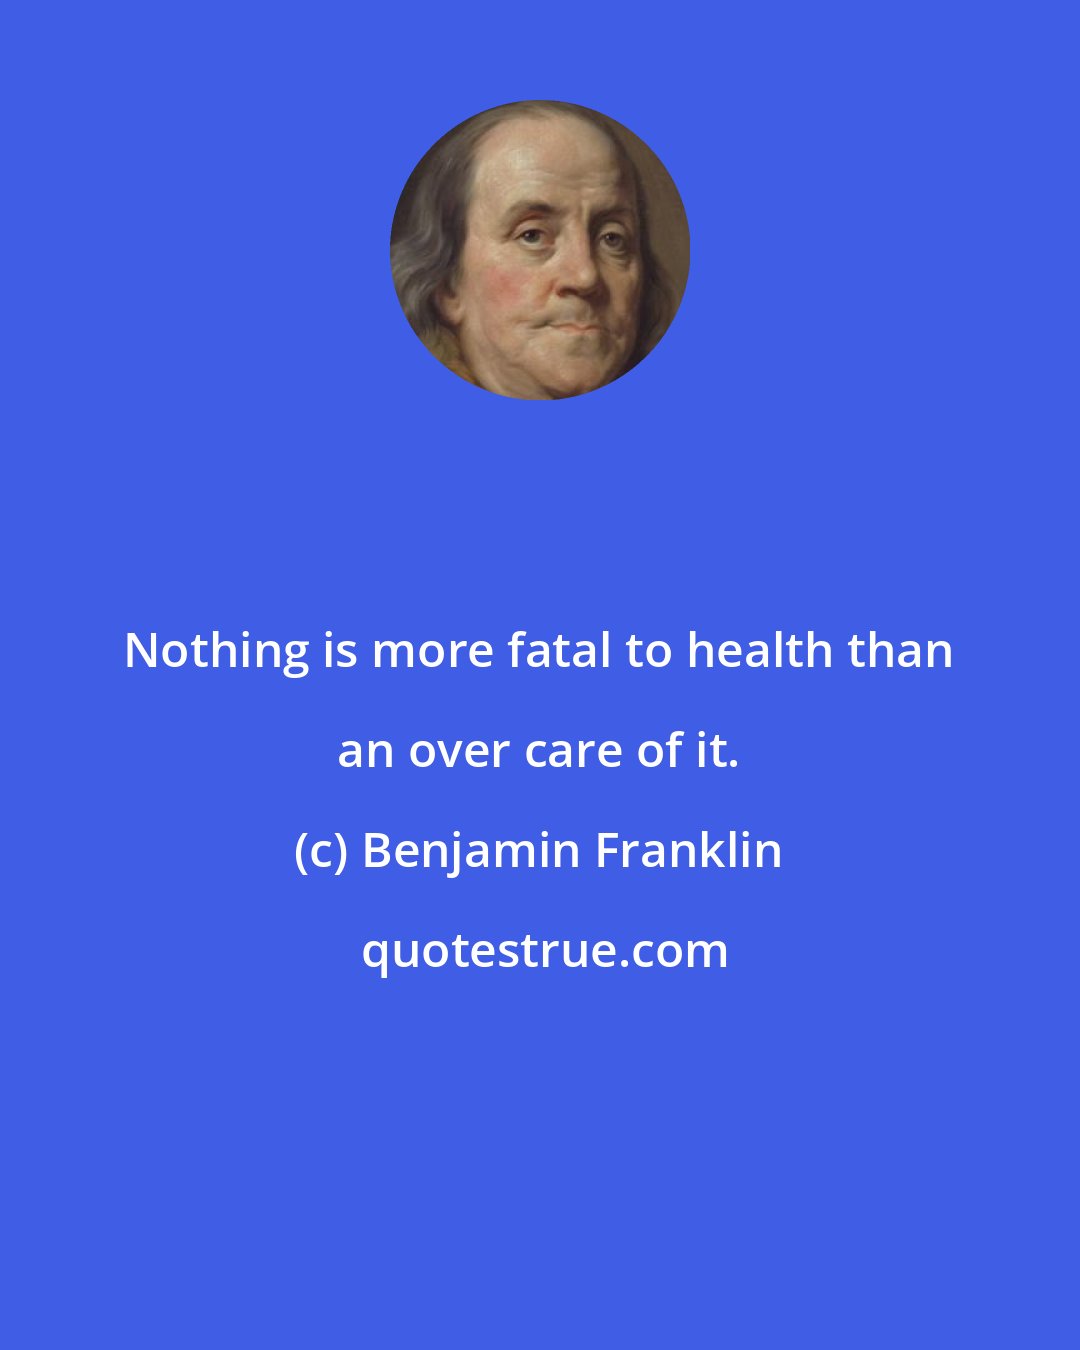 Benjamin Franklin: Nothing is more fatal to health than an over care of it.